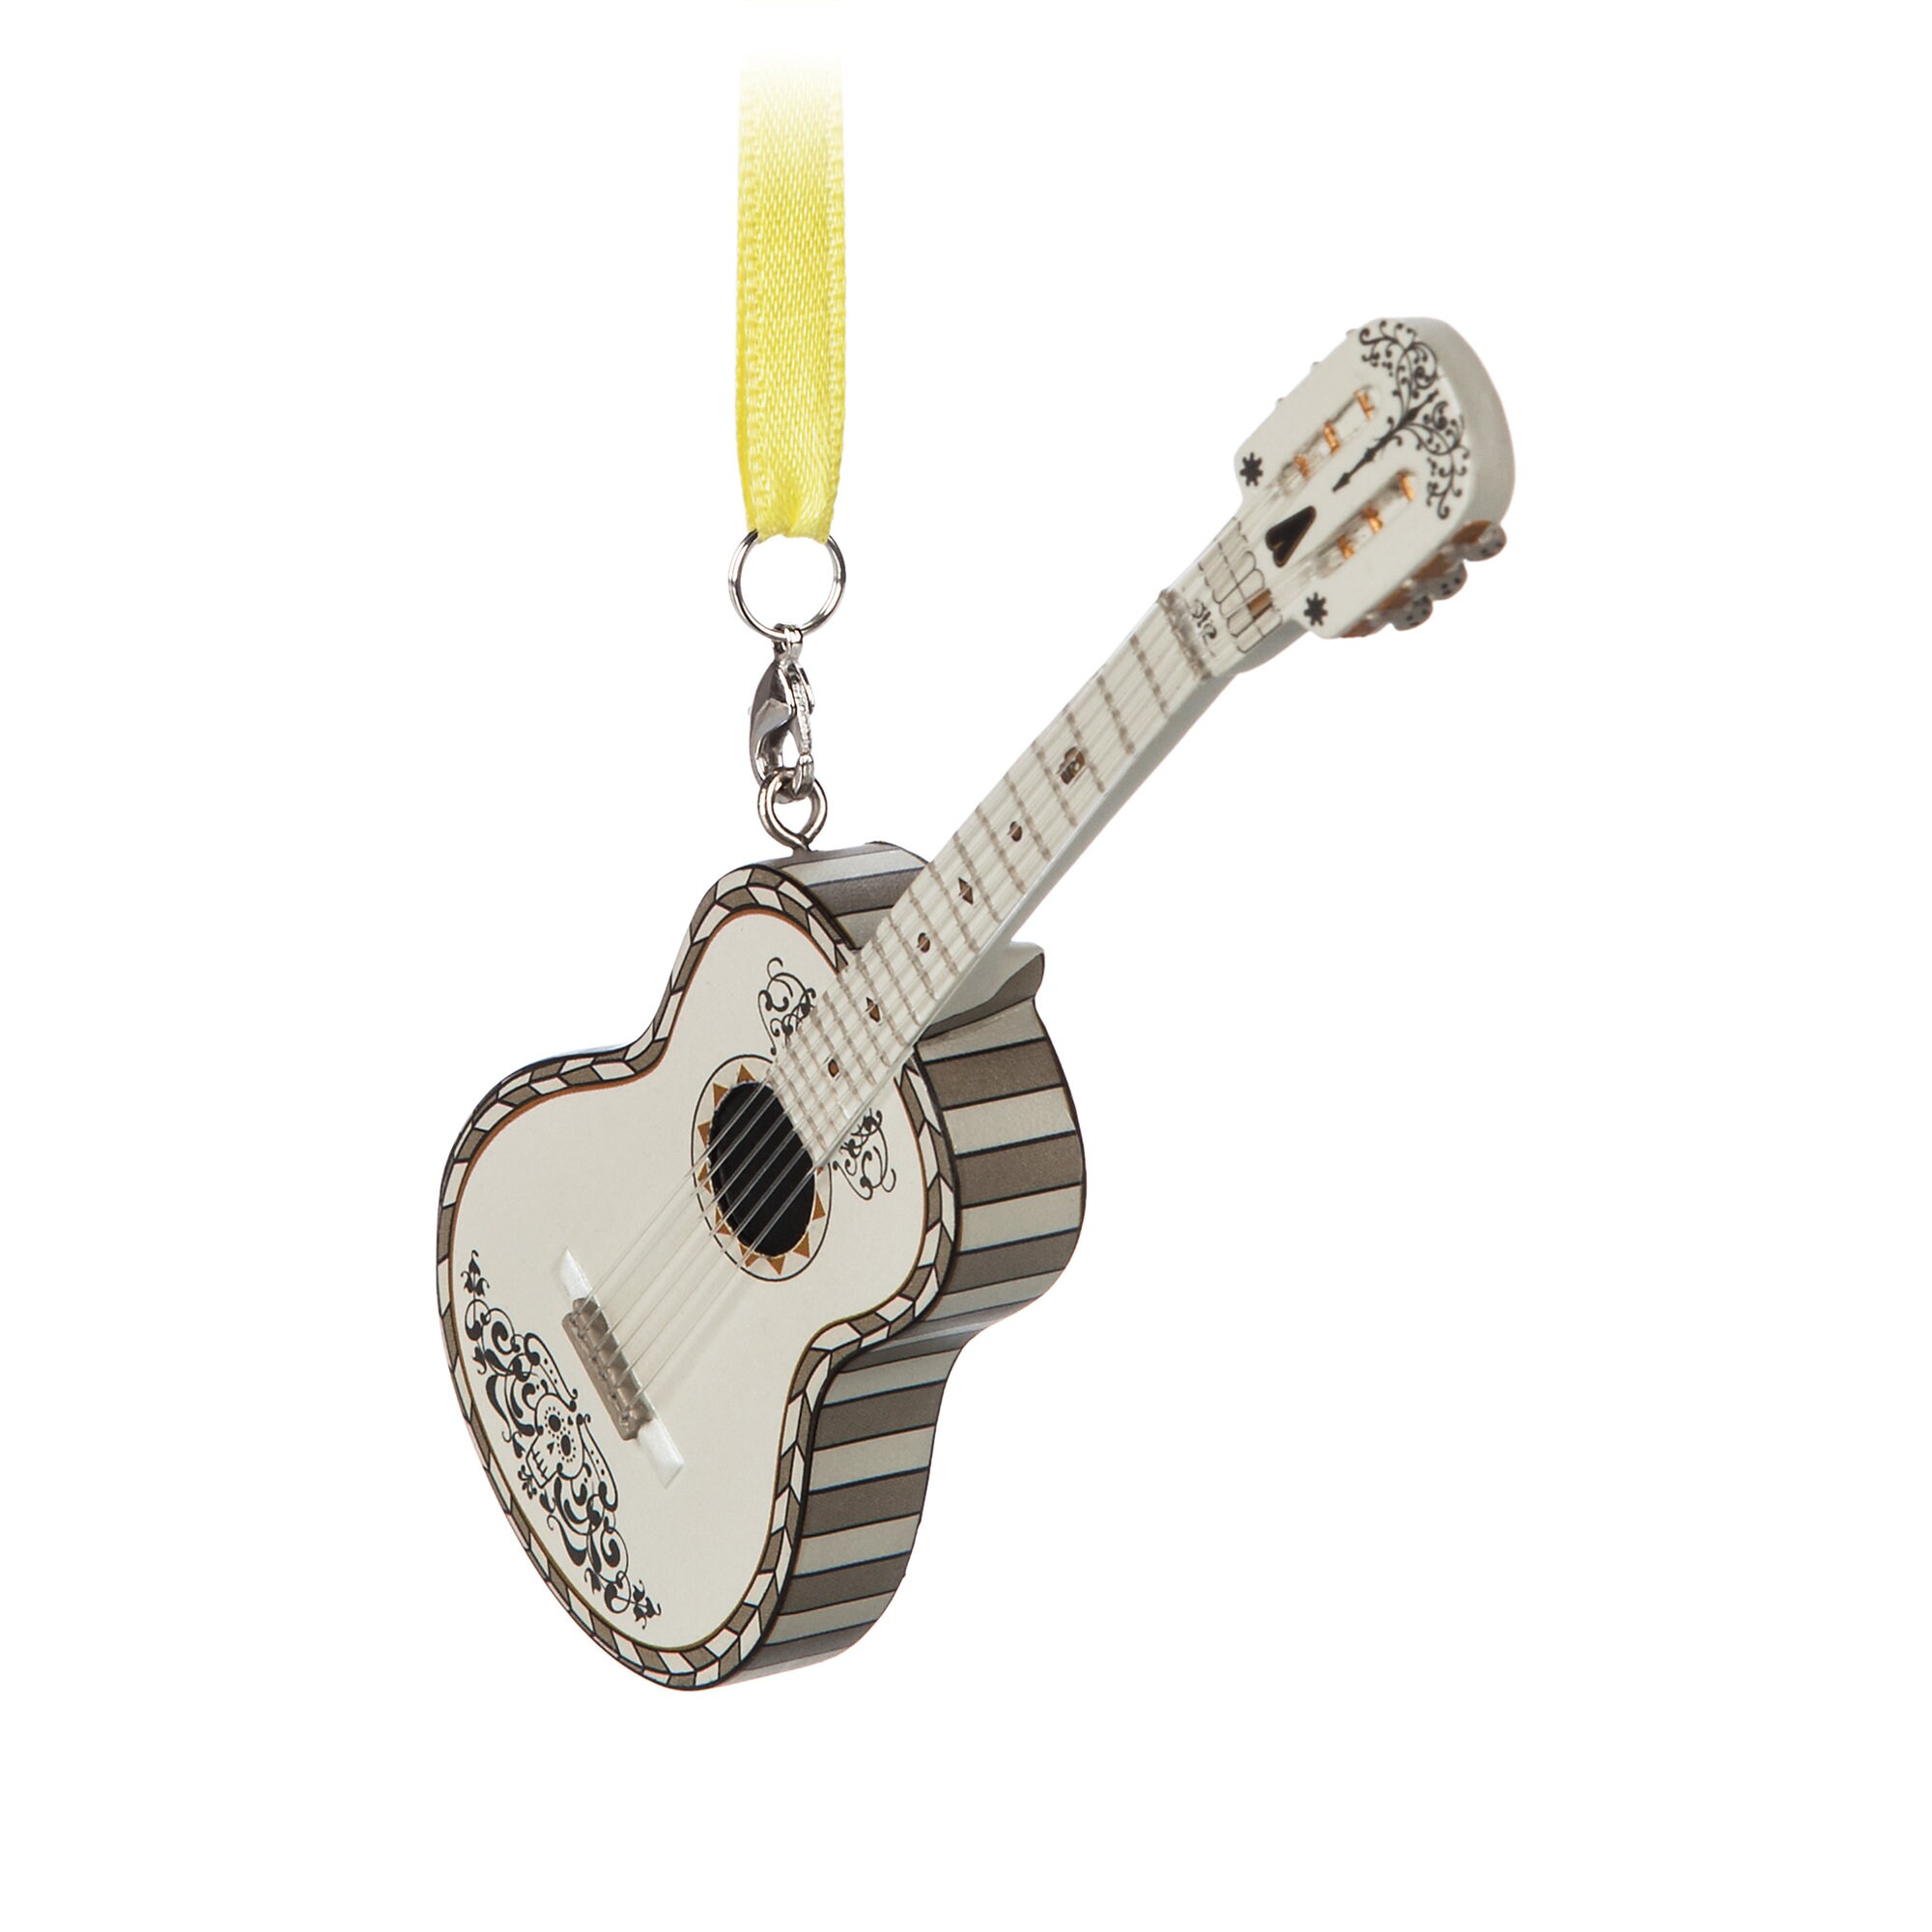 Download Coco Guitar Figural Ornament here now - Dis Merchandise News